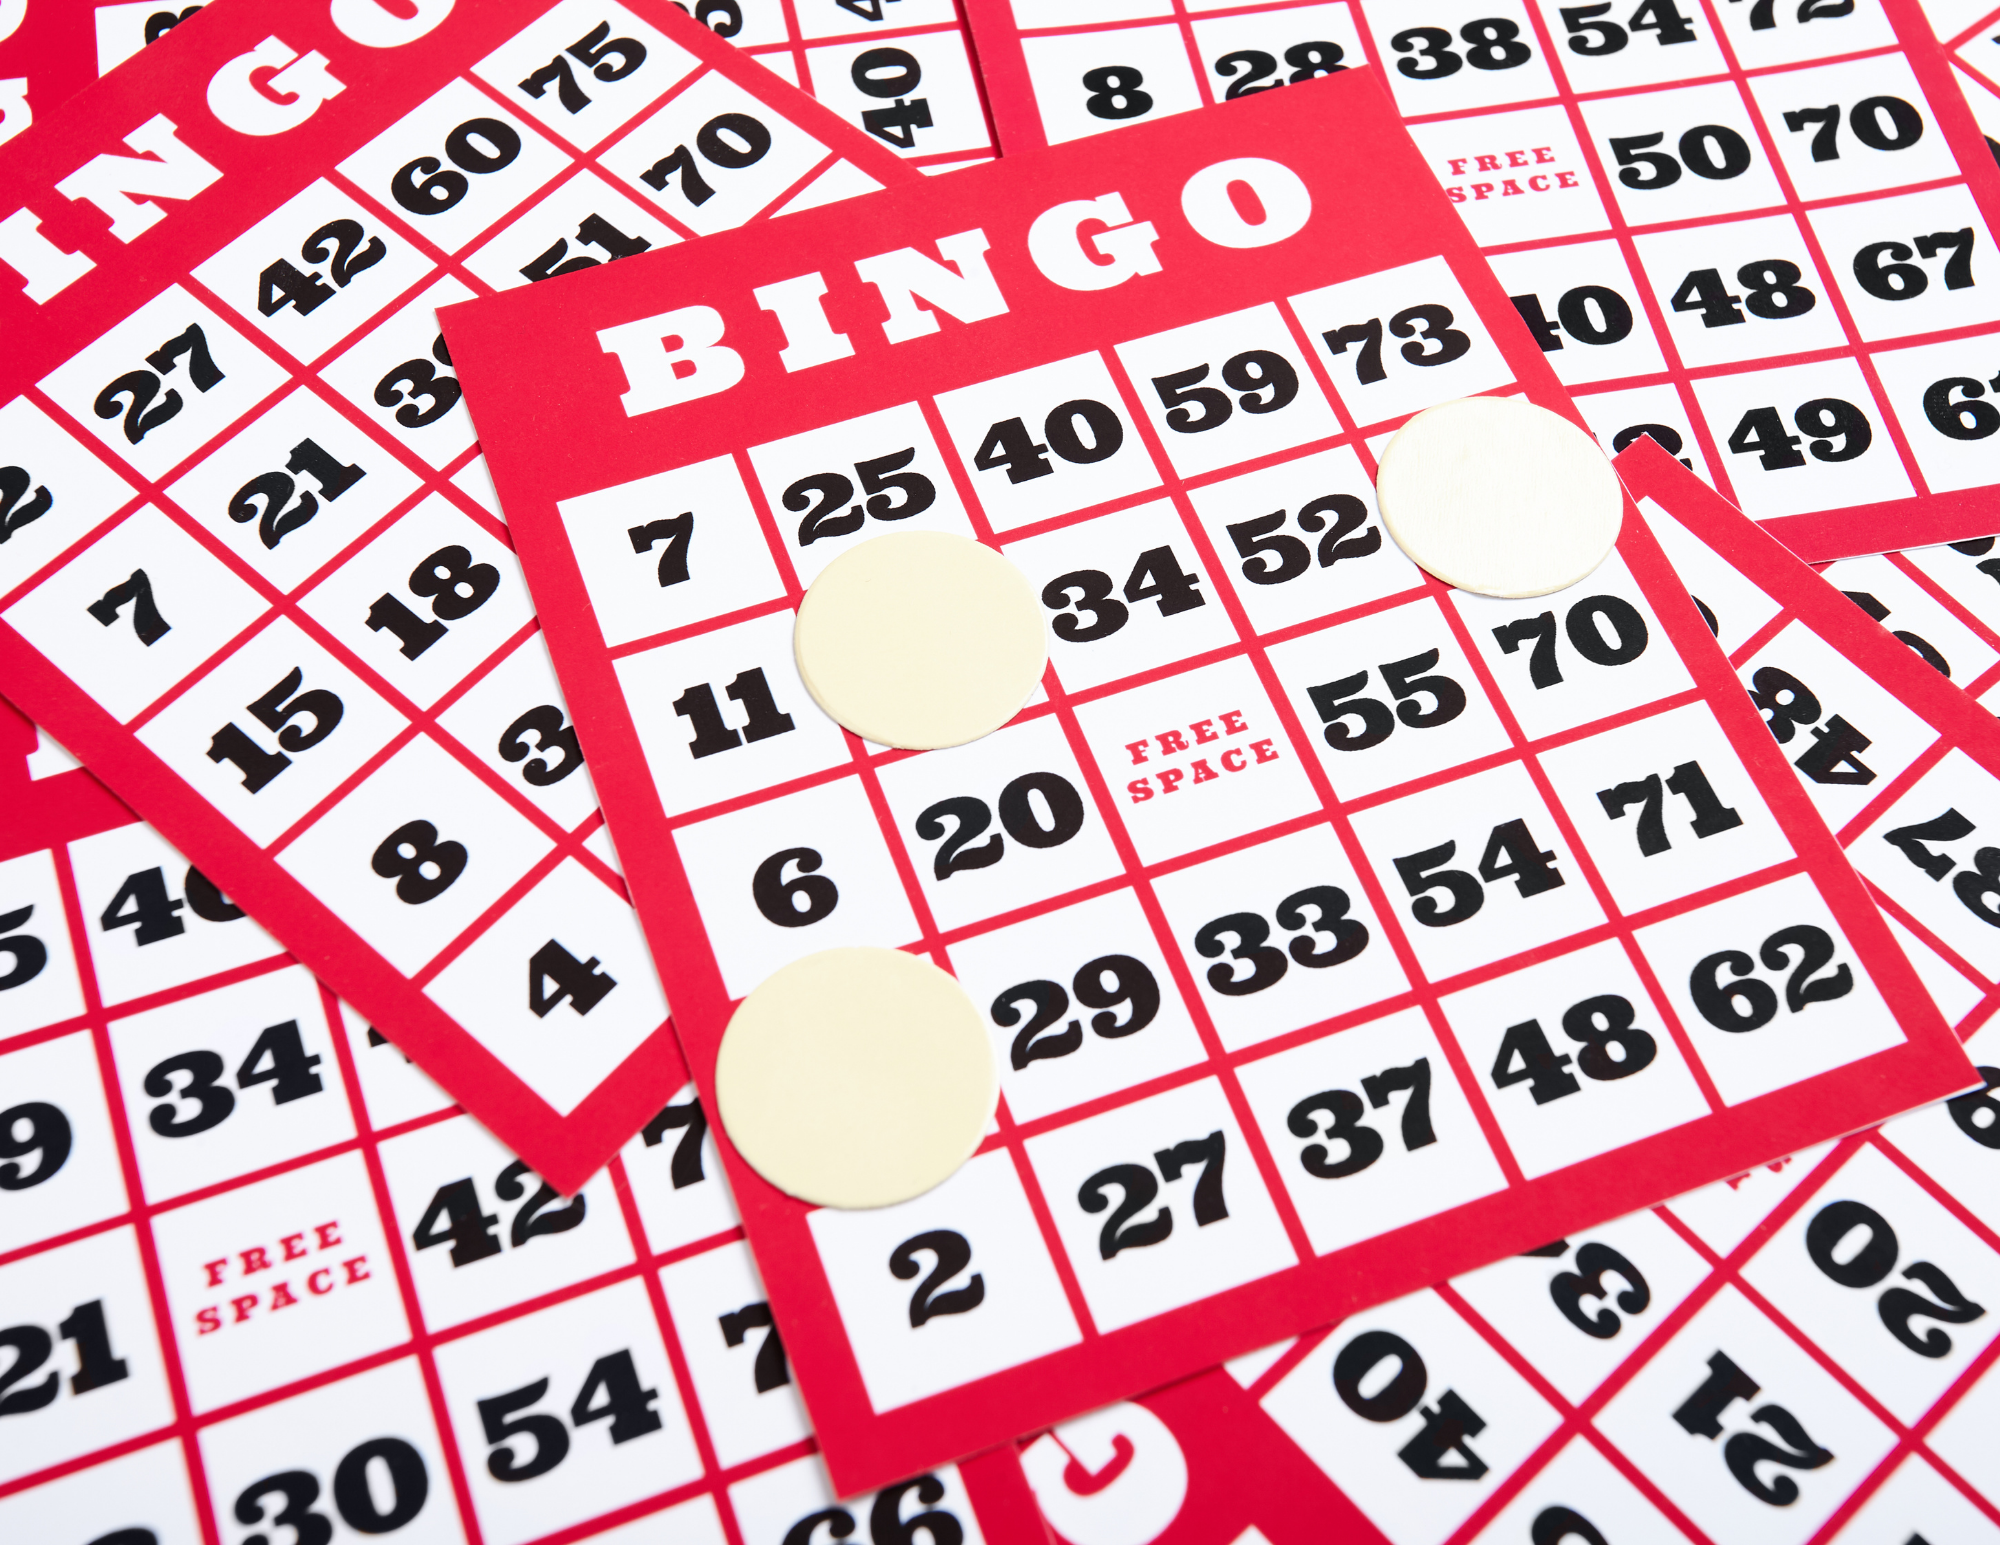 Picture of Bingo cards